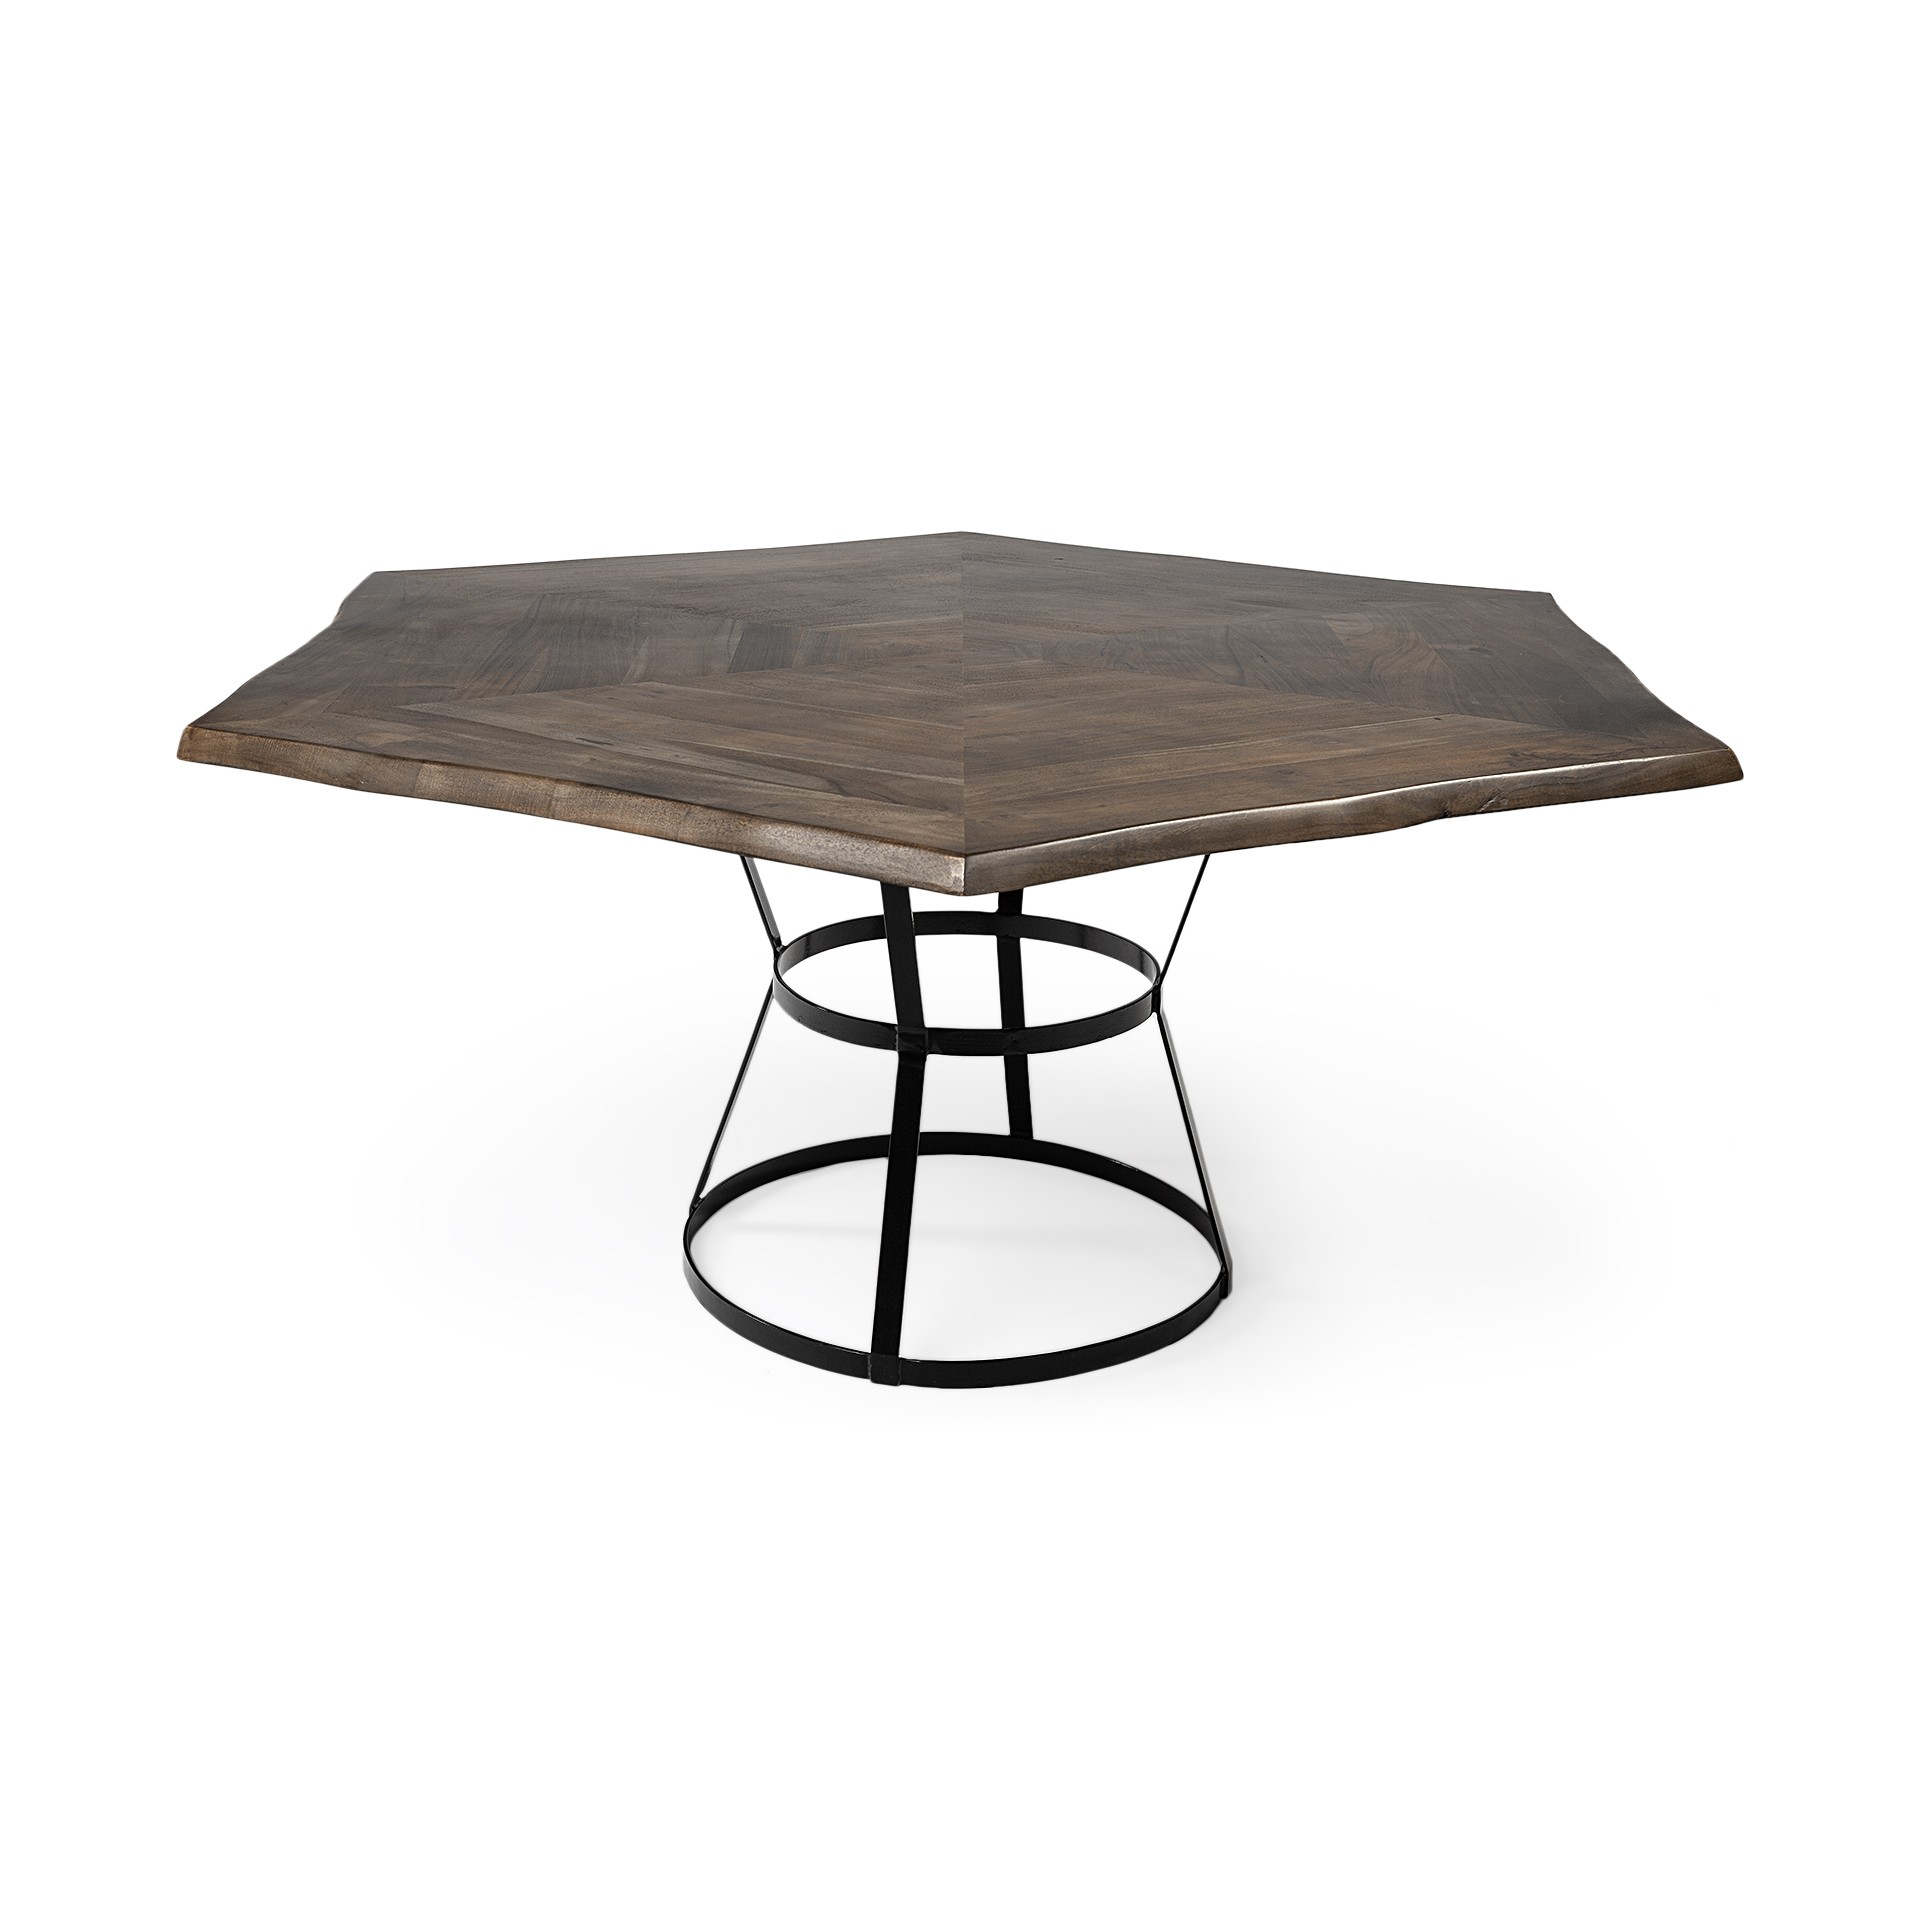 68" hexagon Brown Solid Wood Top with Black Metal Base Dining Table